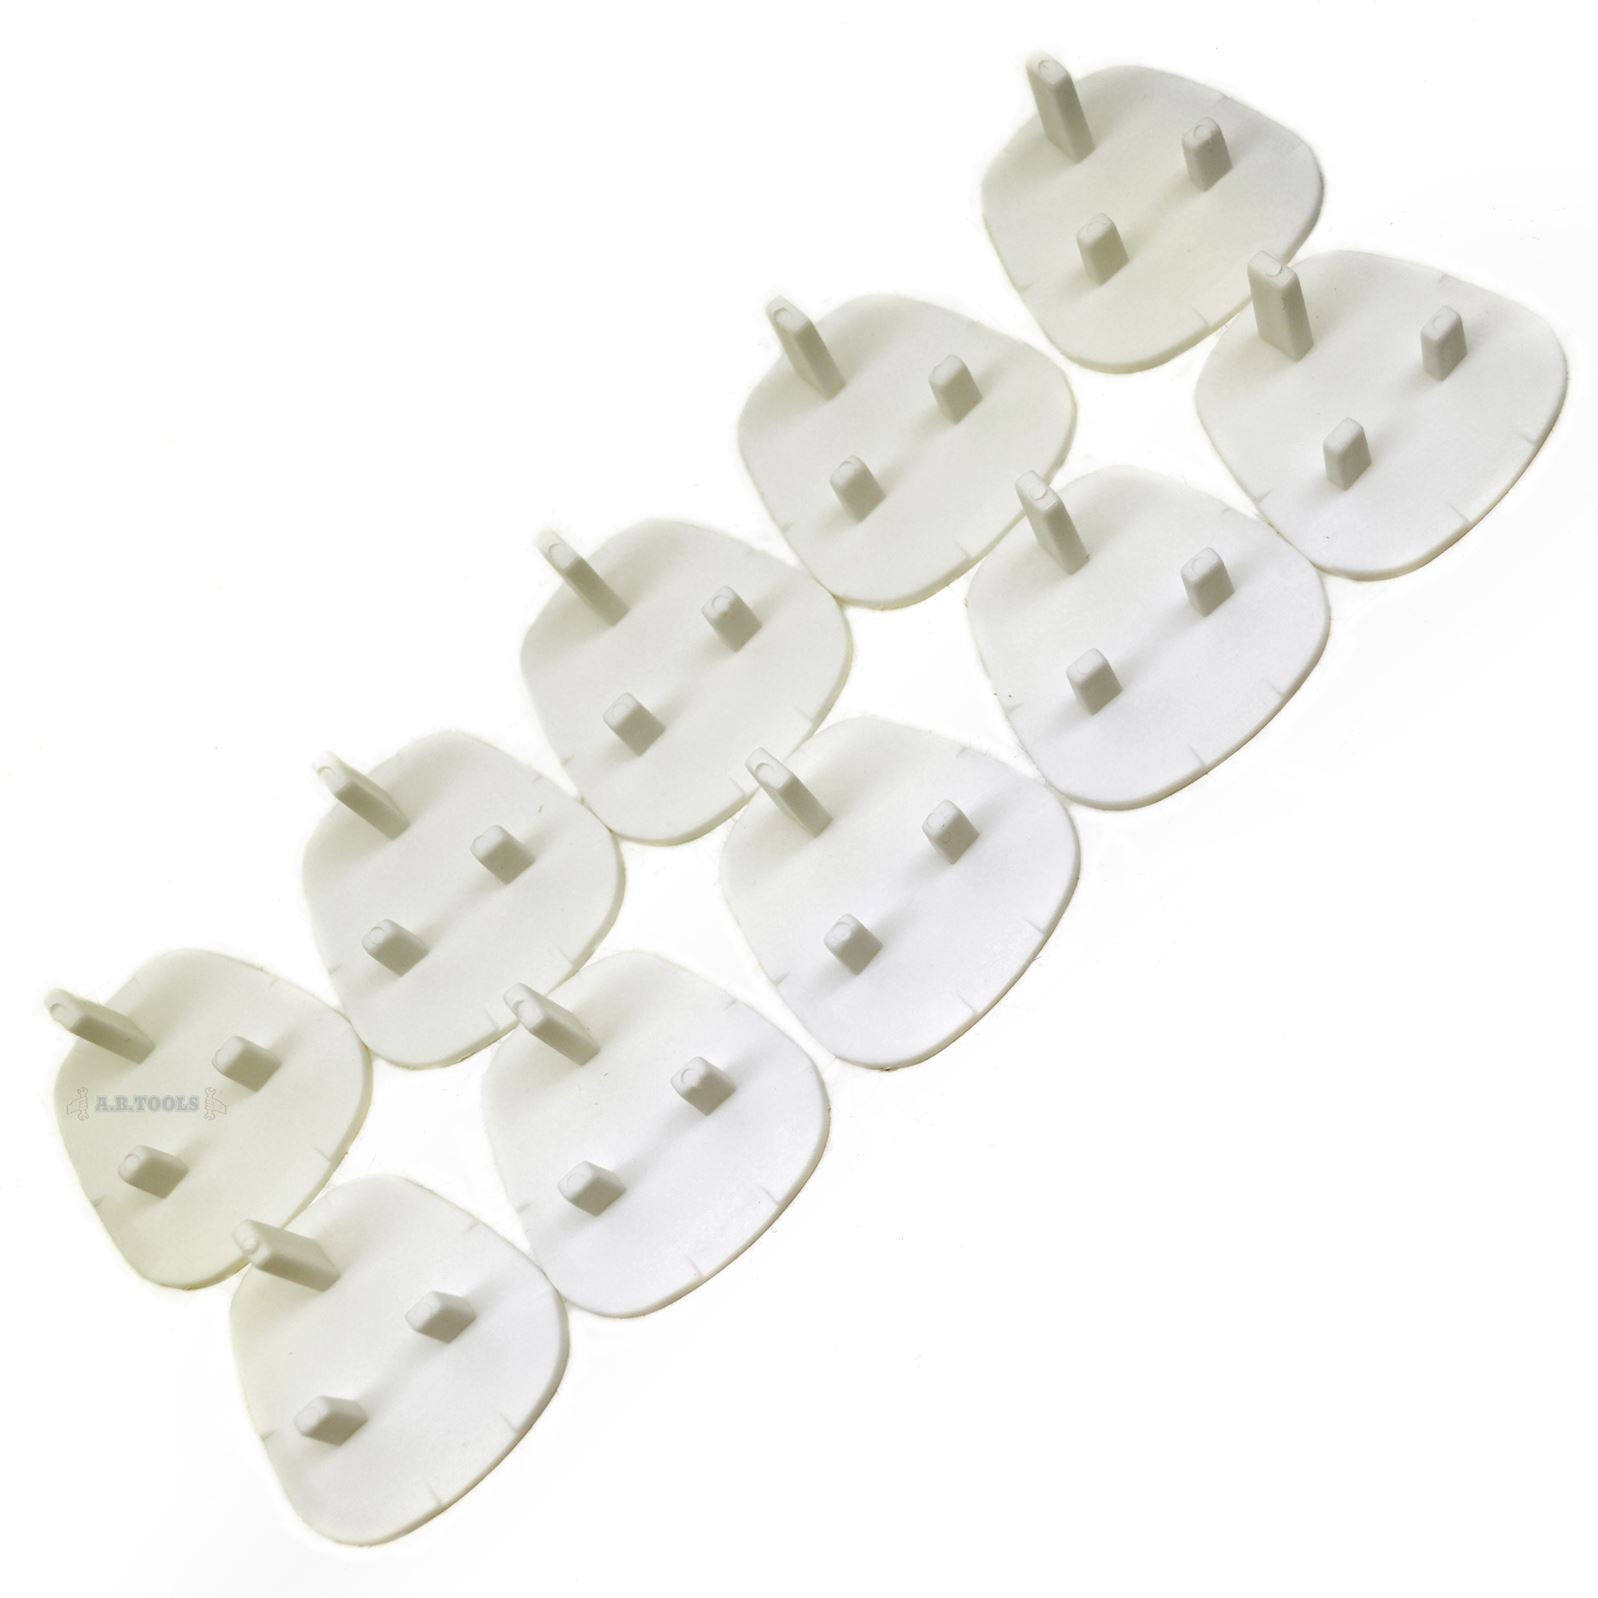 10PK Mains Baby Proof Plug Socket Cover Protector Protection Guard Sil165